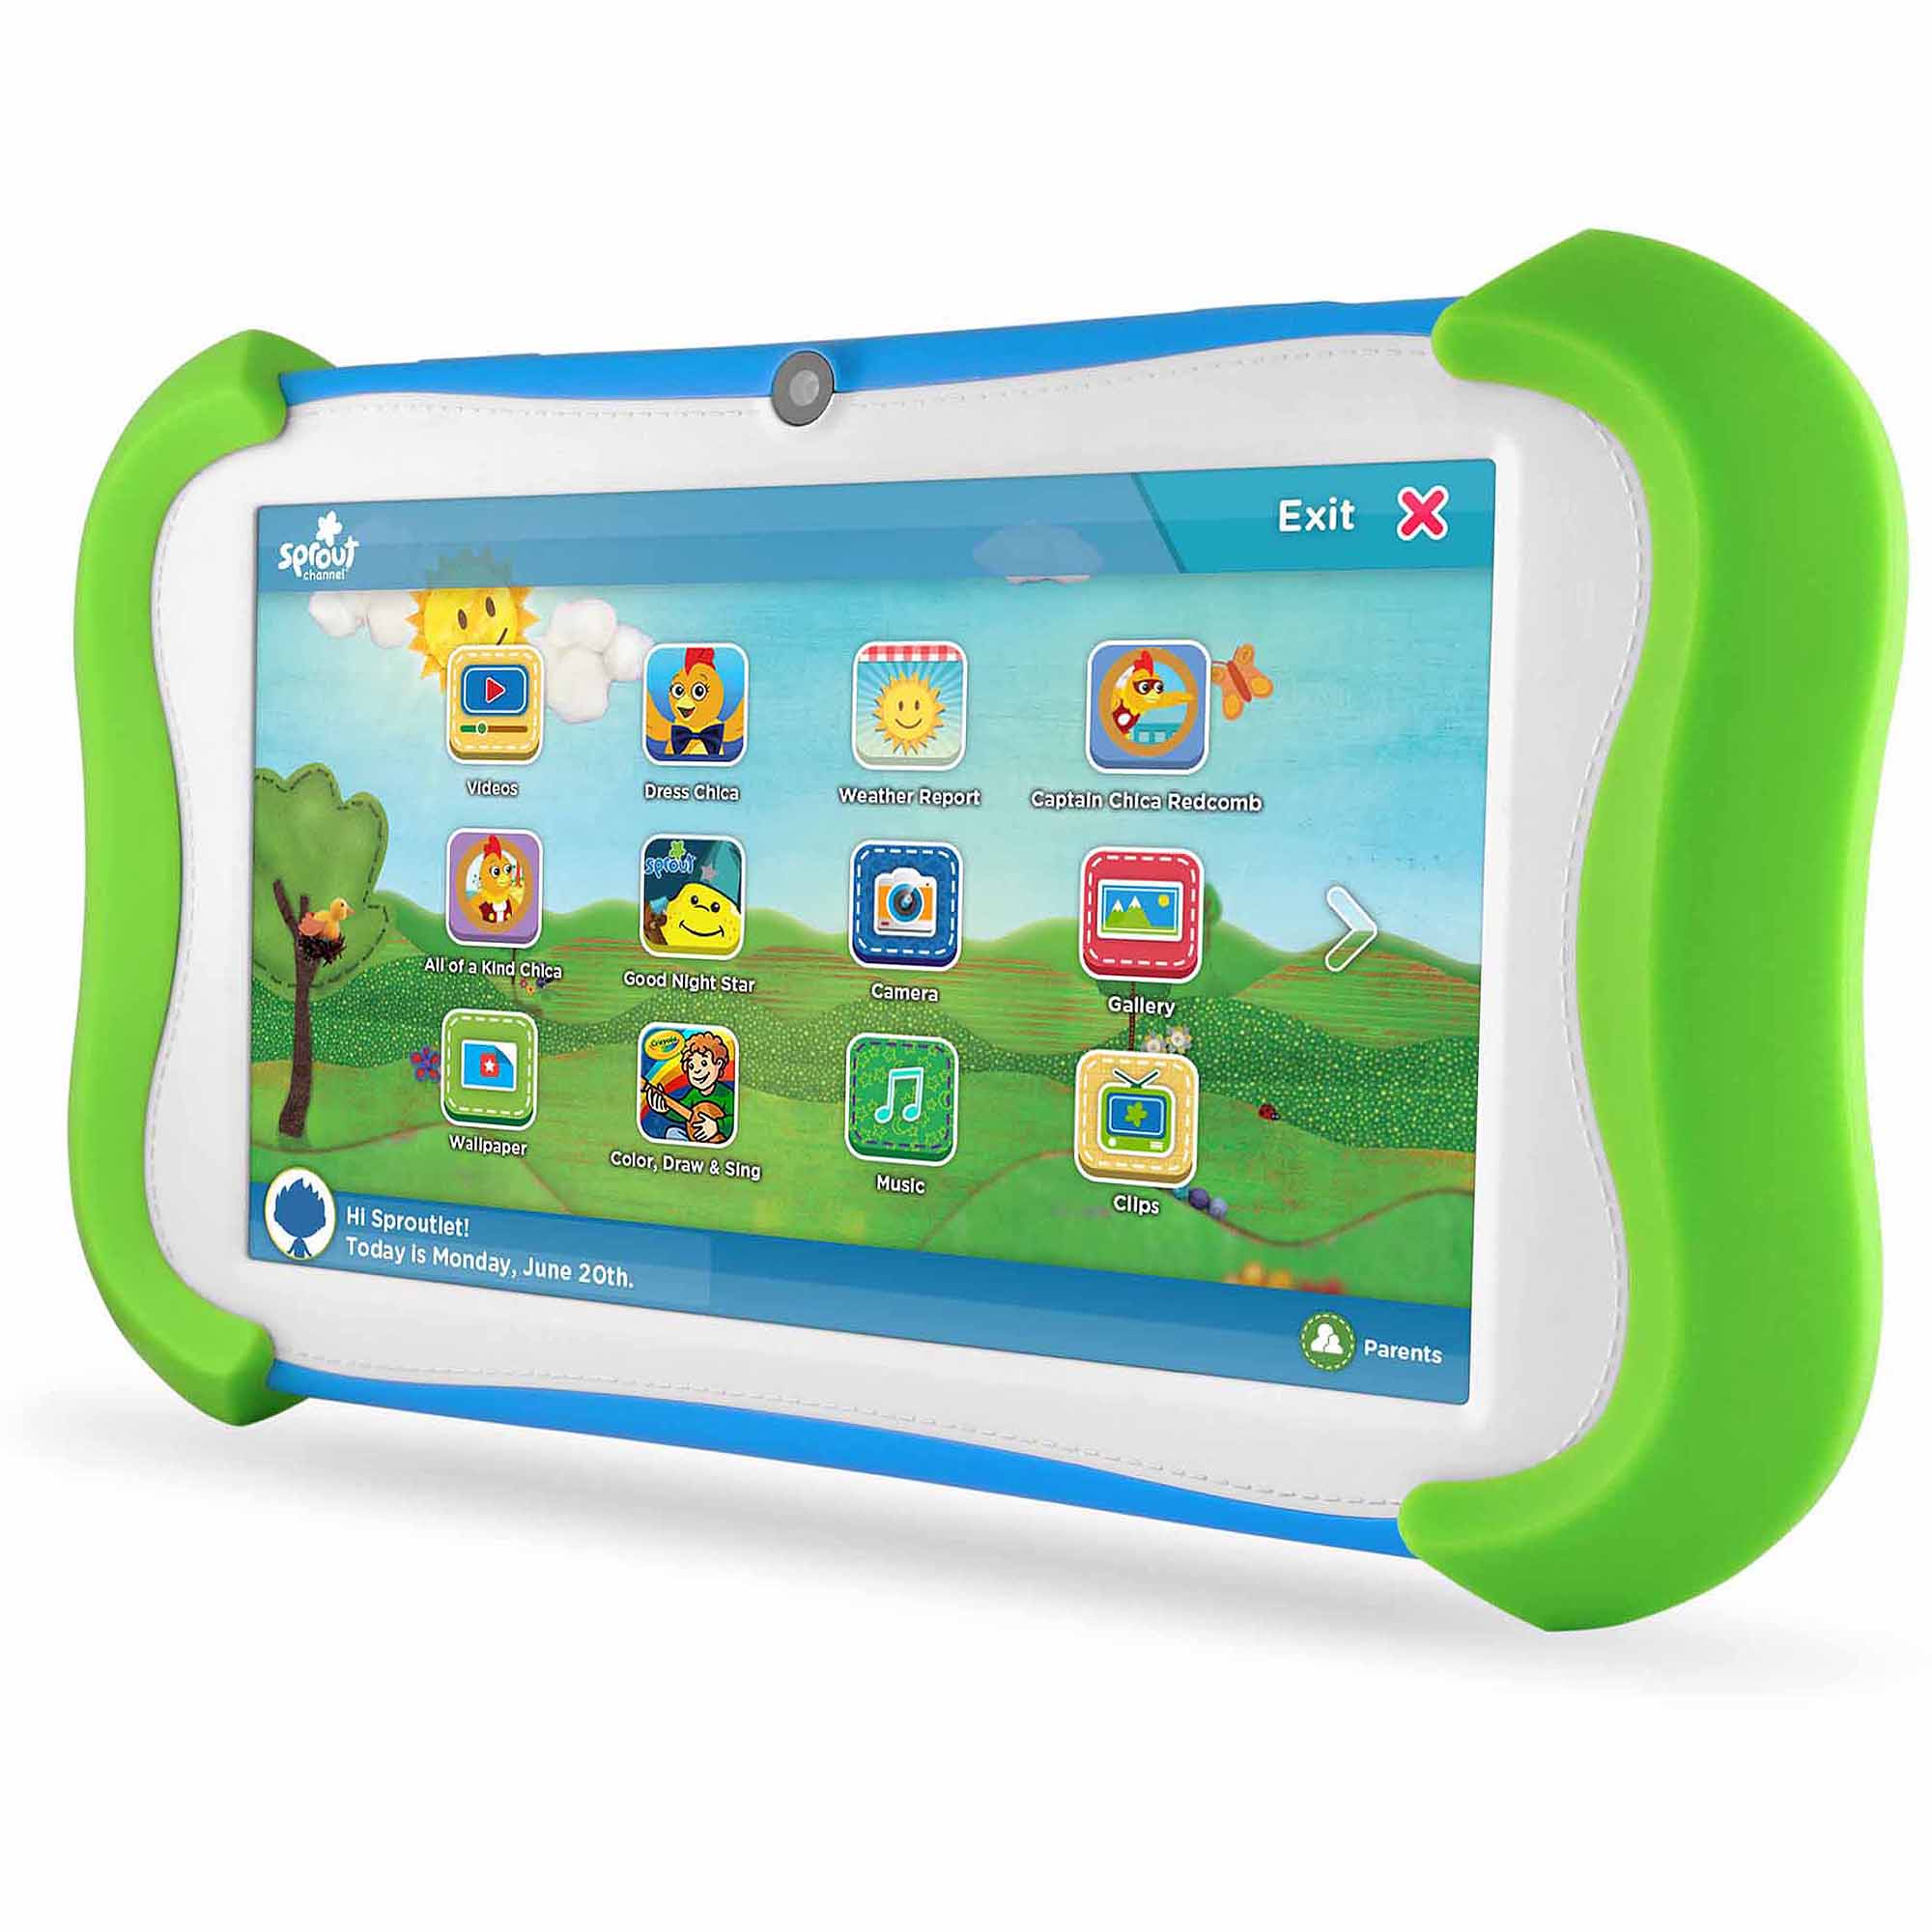 Restored Sprout Channel Cubby 7" Kids Tablet 16GB Quad Core (Refurbished) - image 3 of 5